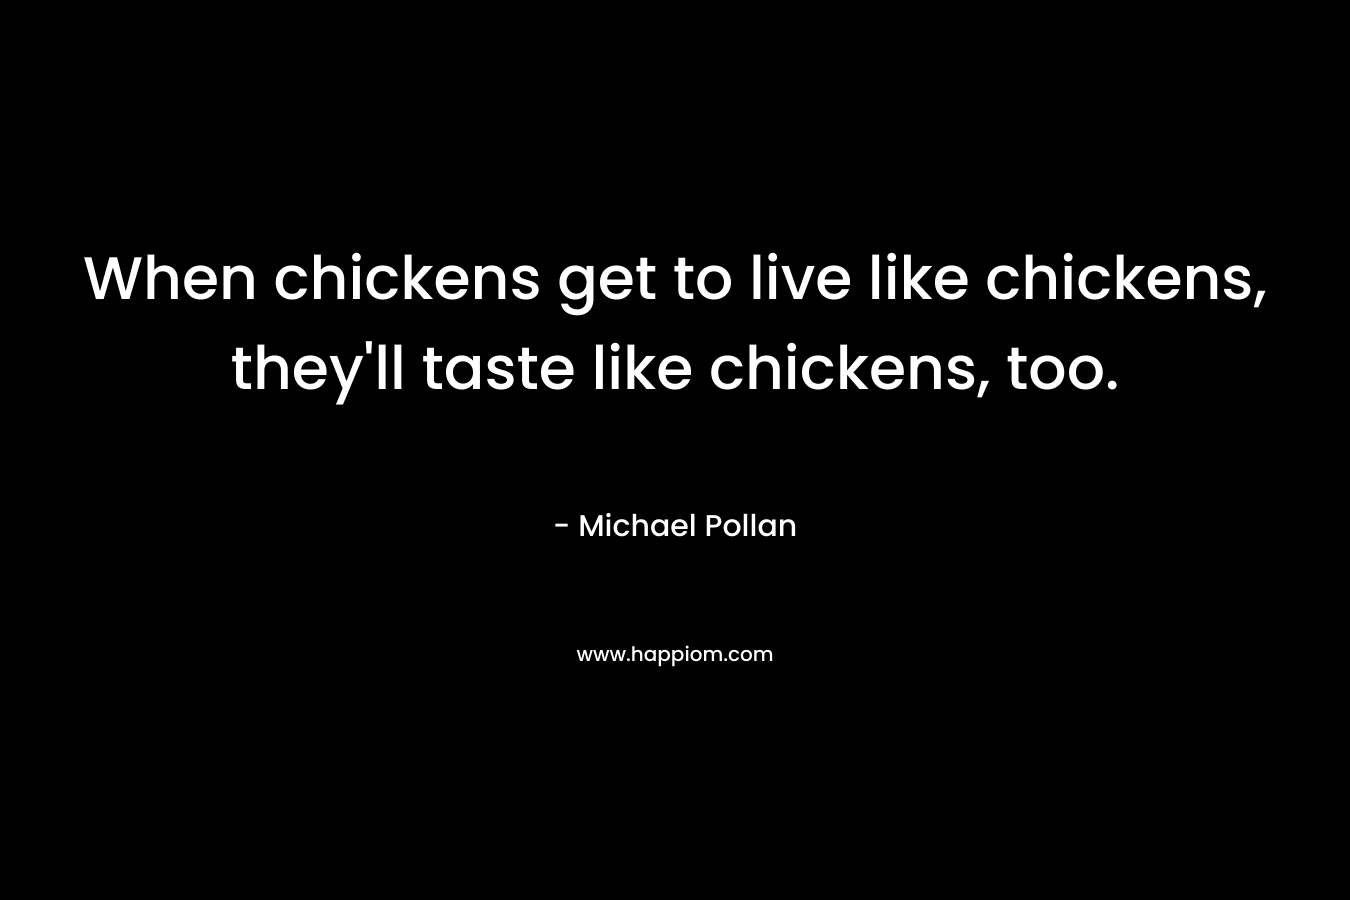 When chickens get to live like chickens, they’ll taste like chickens, too. – Michael Pollan